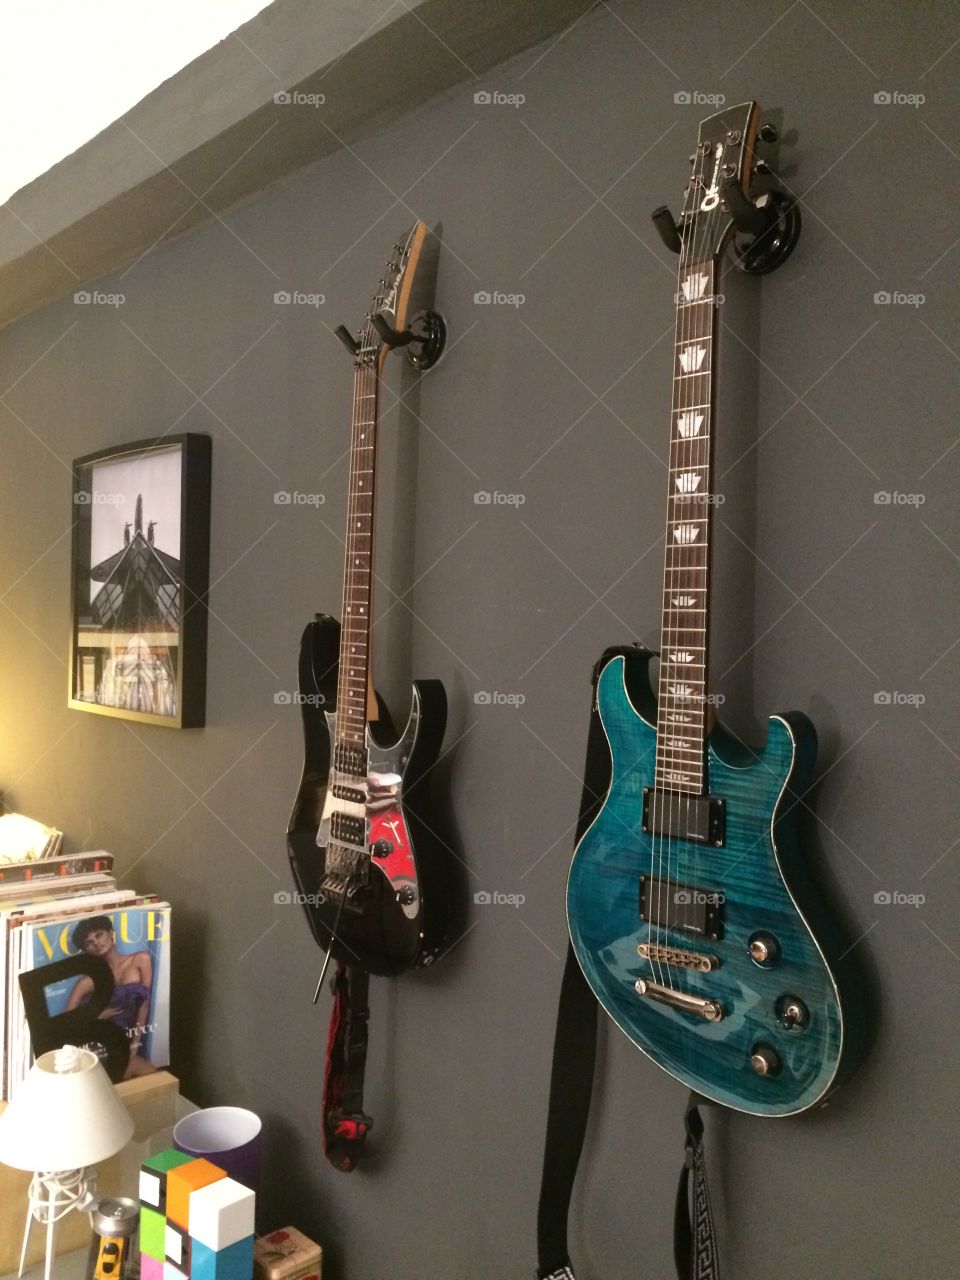 Guitars on the wall